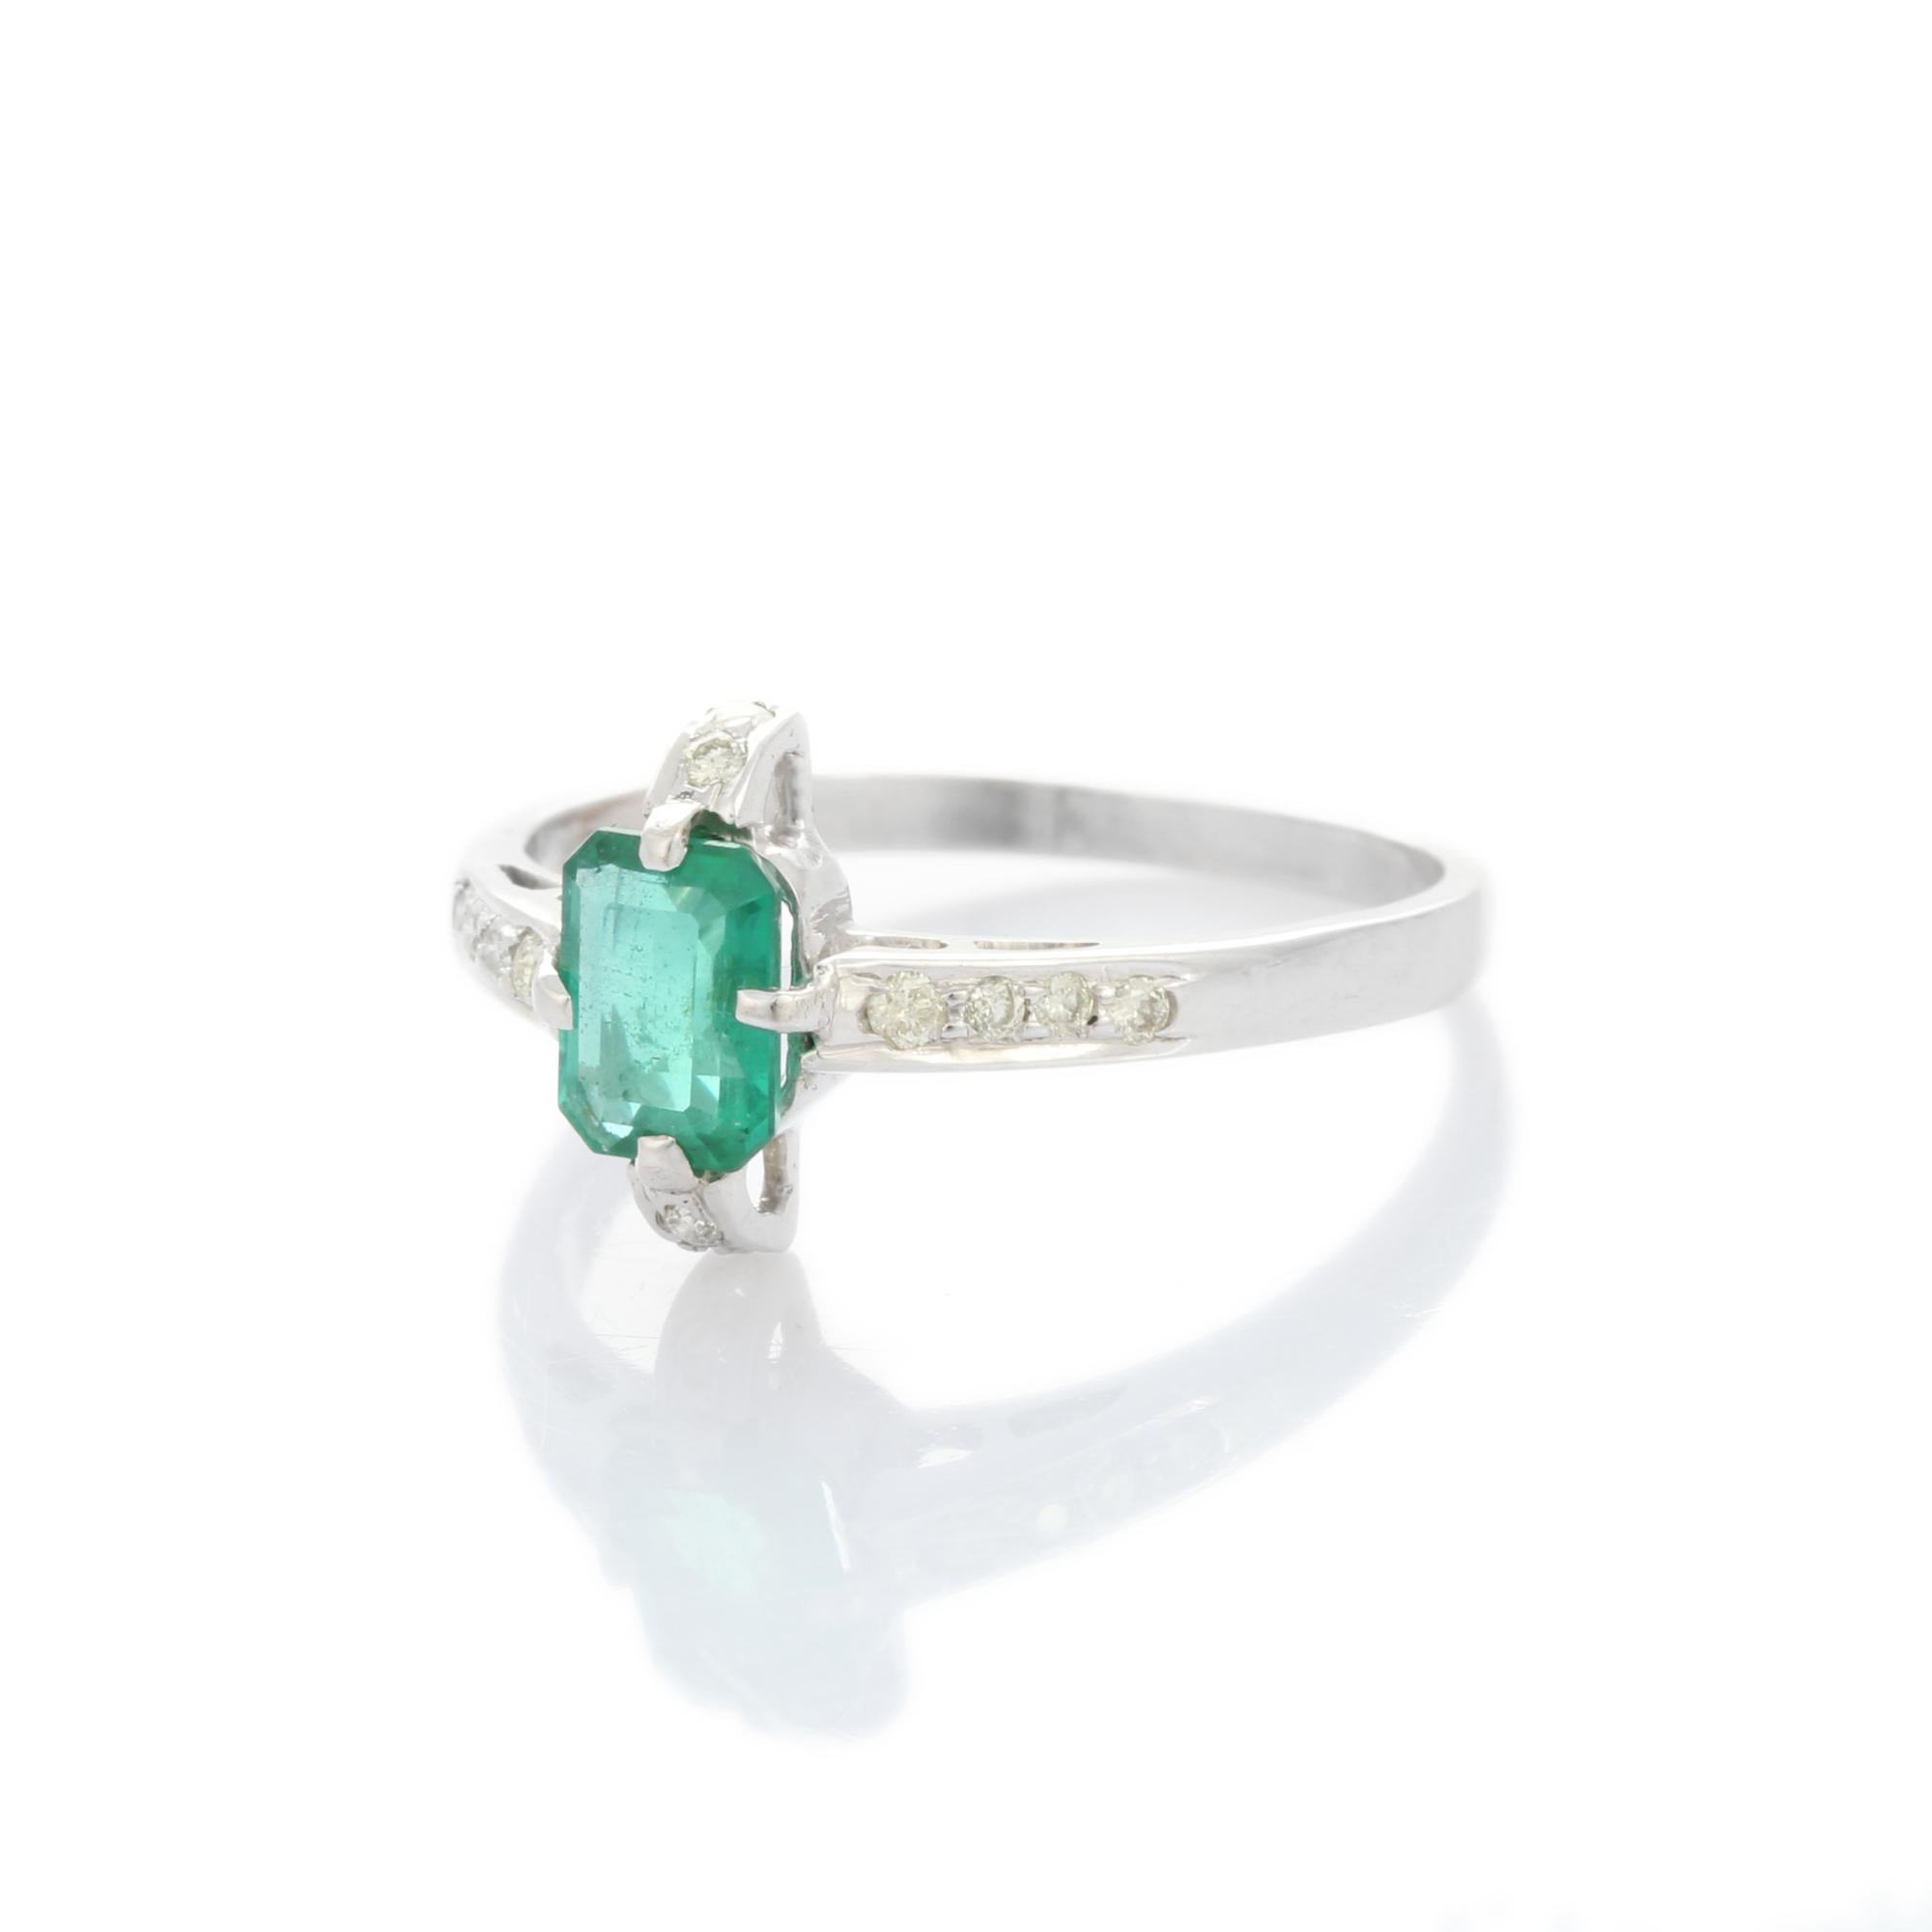 For Sale:  14K White Gold Emerald Ring with Diamonds  4